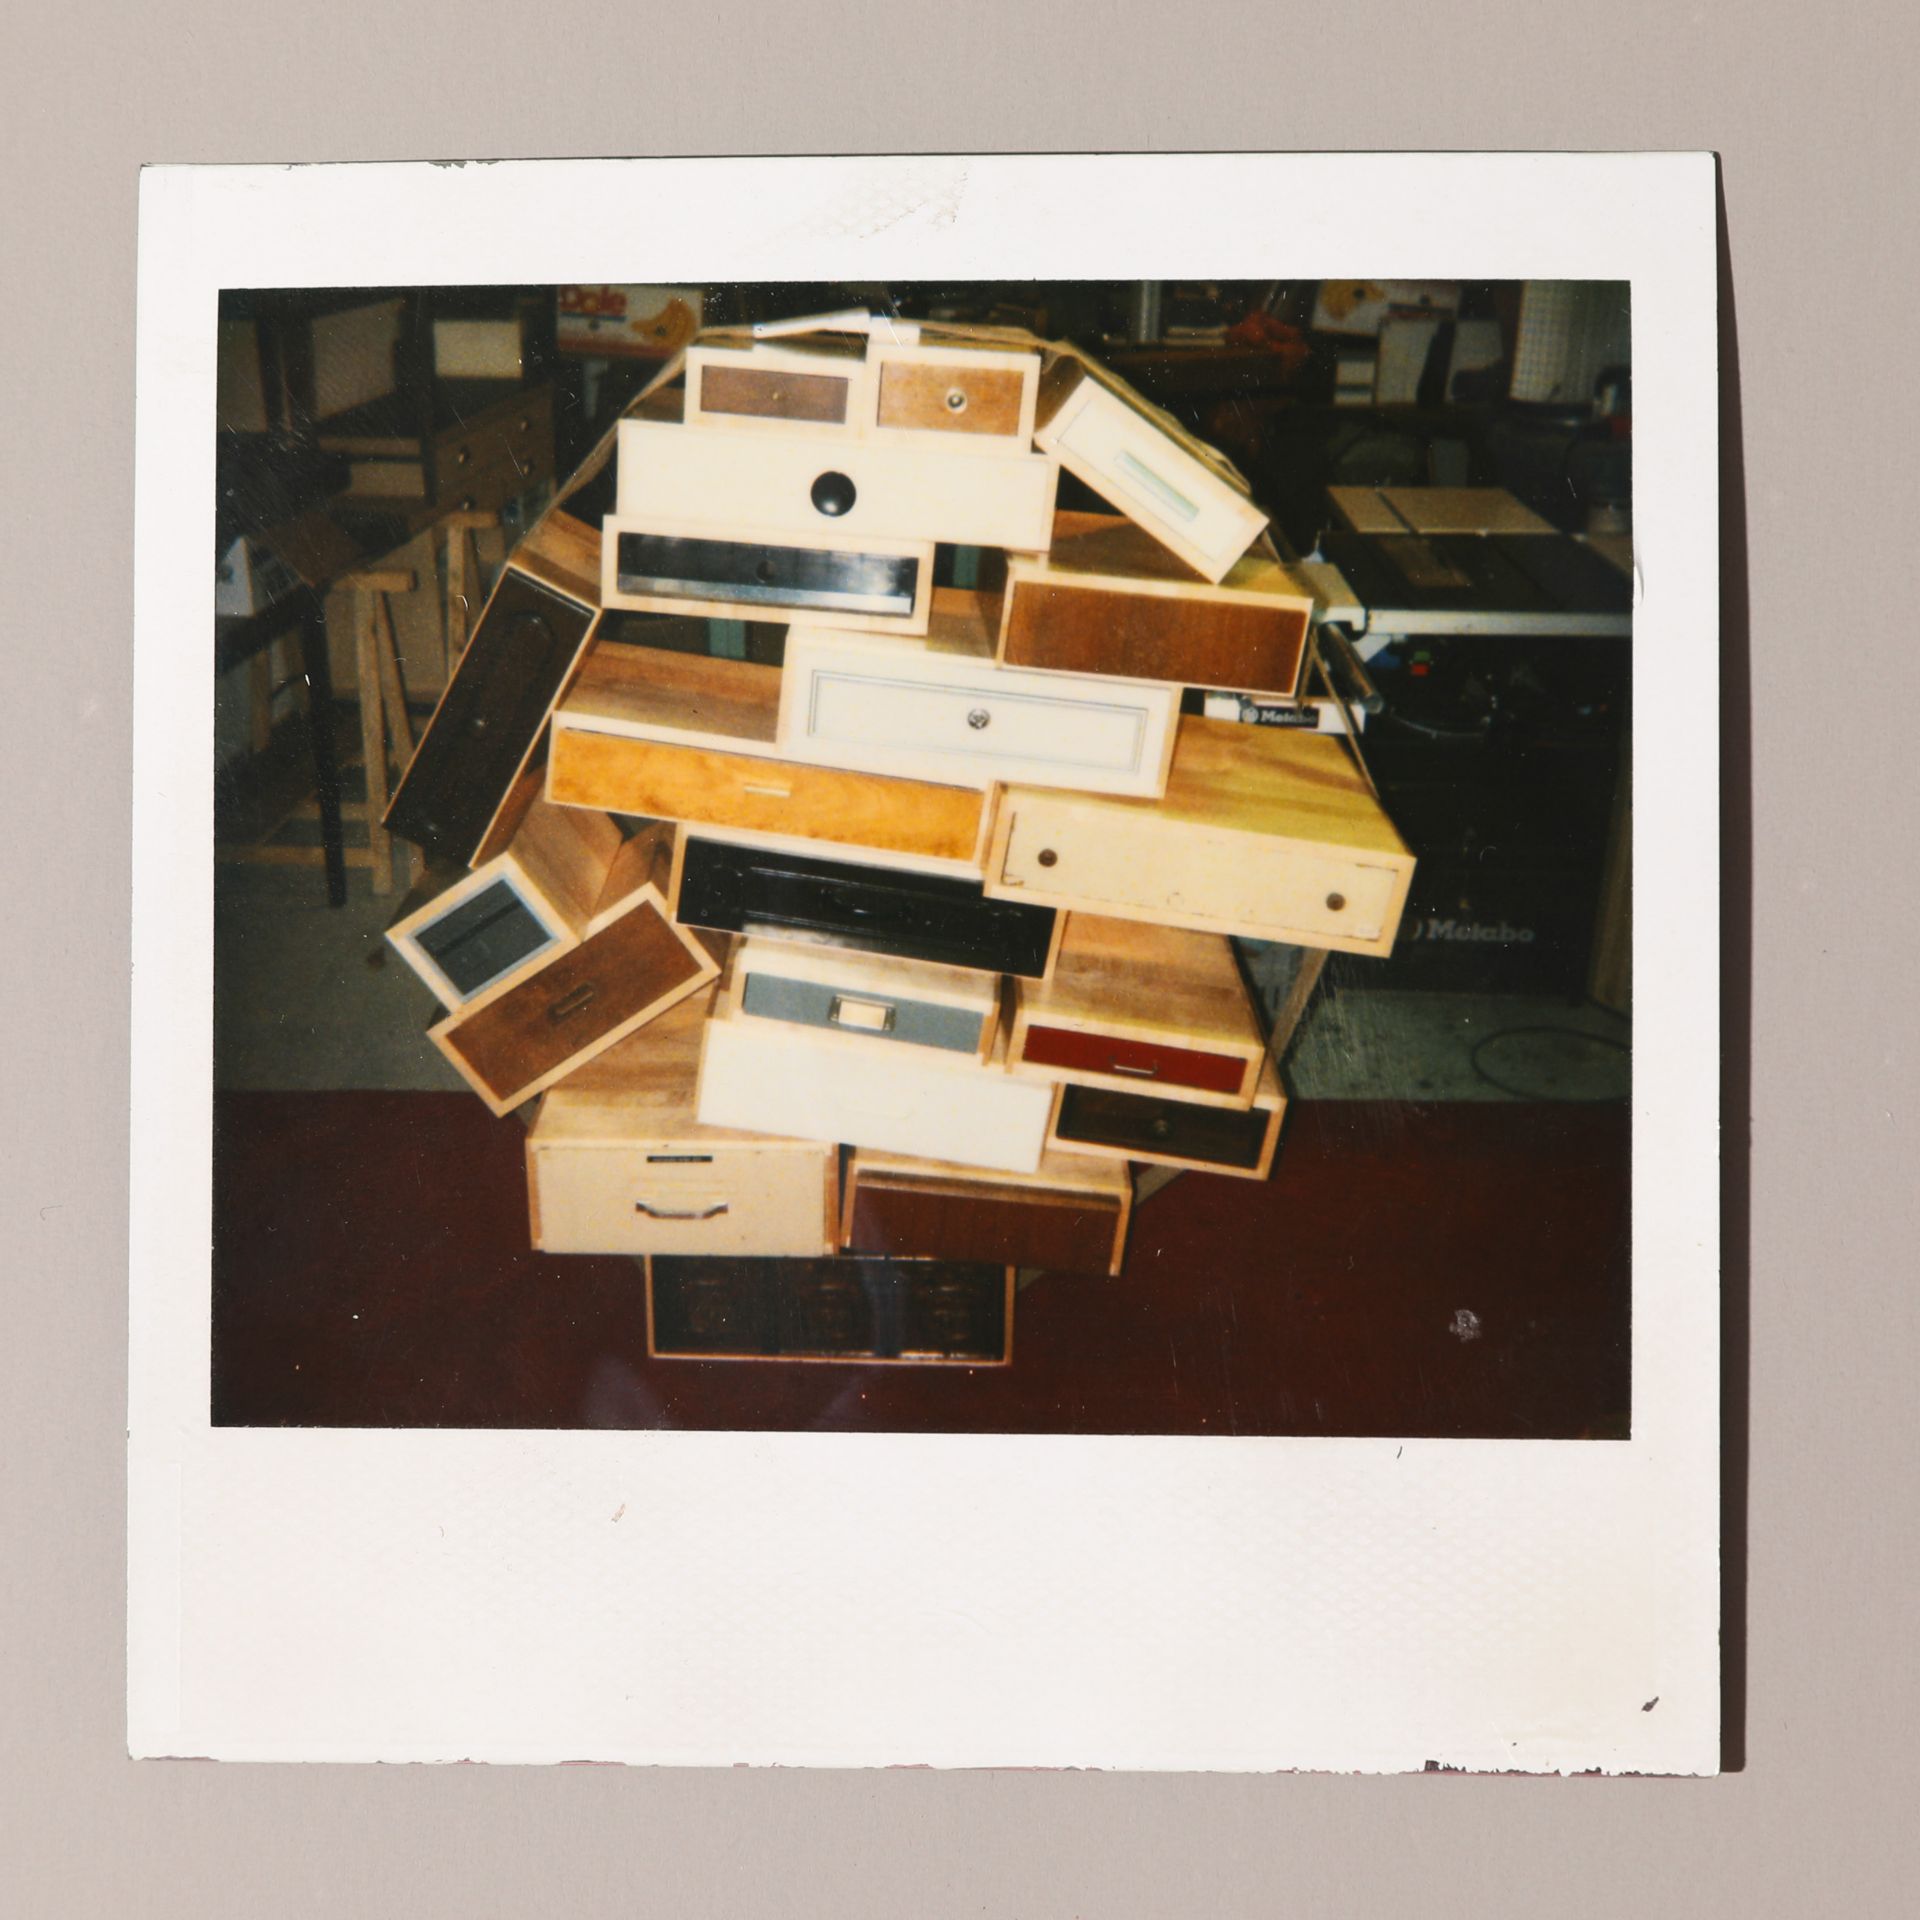 Tejo Rémy, droog design, Drawer object, model You can't lay down your memories - Image 9 of 9